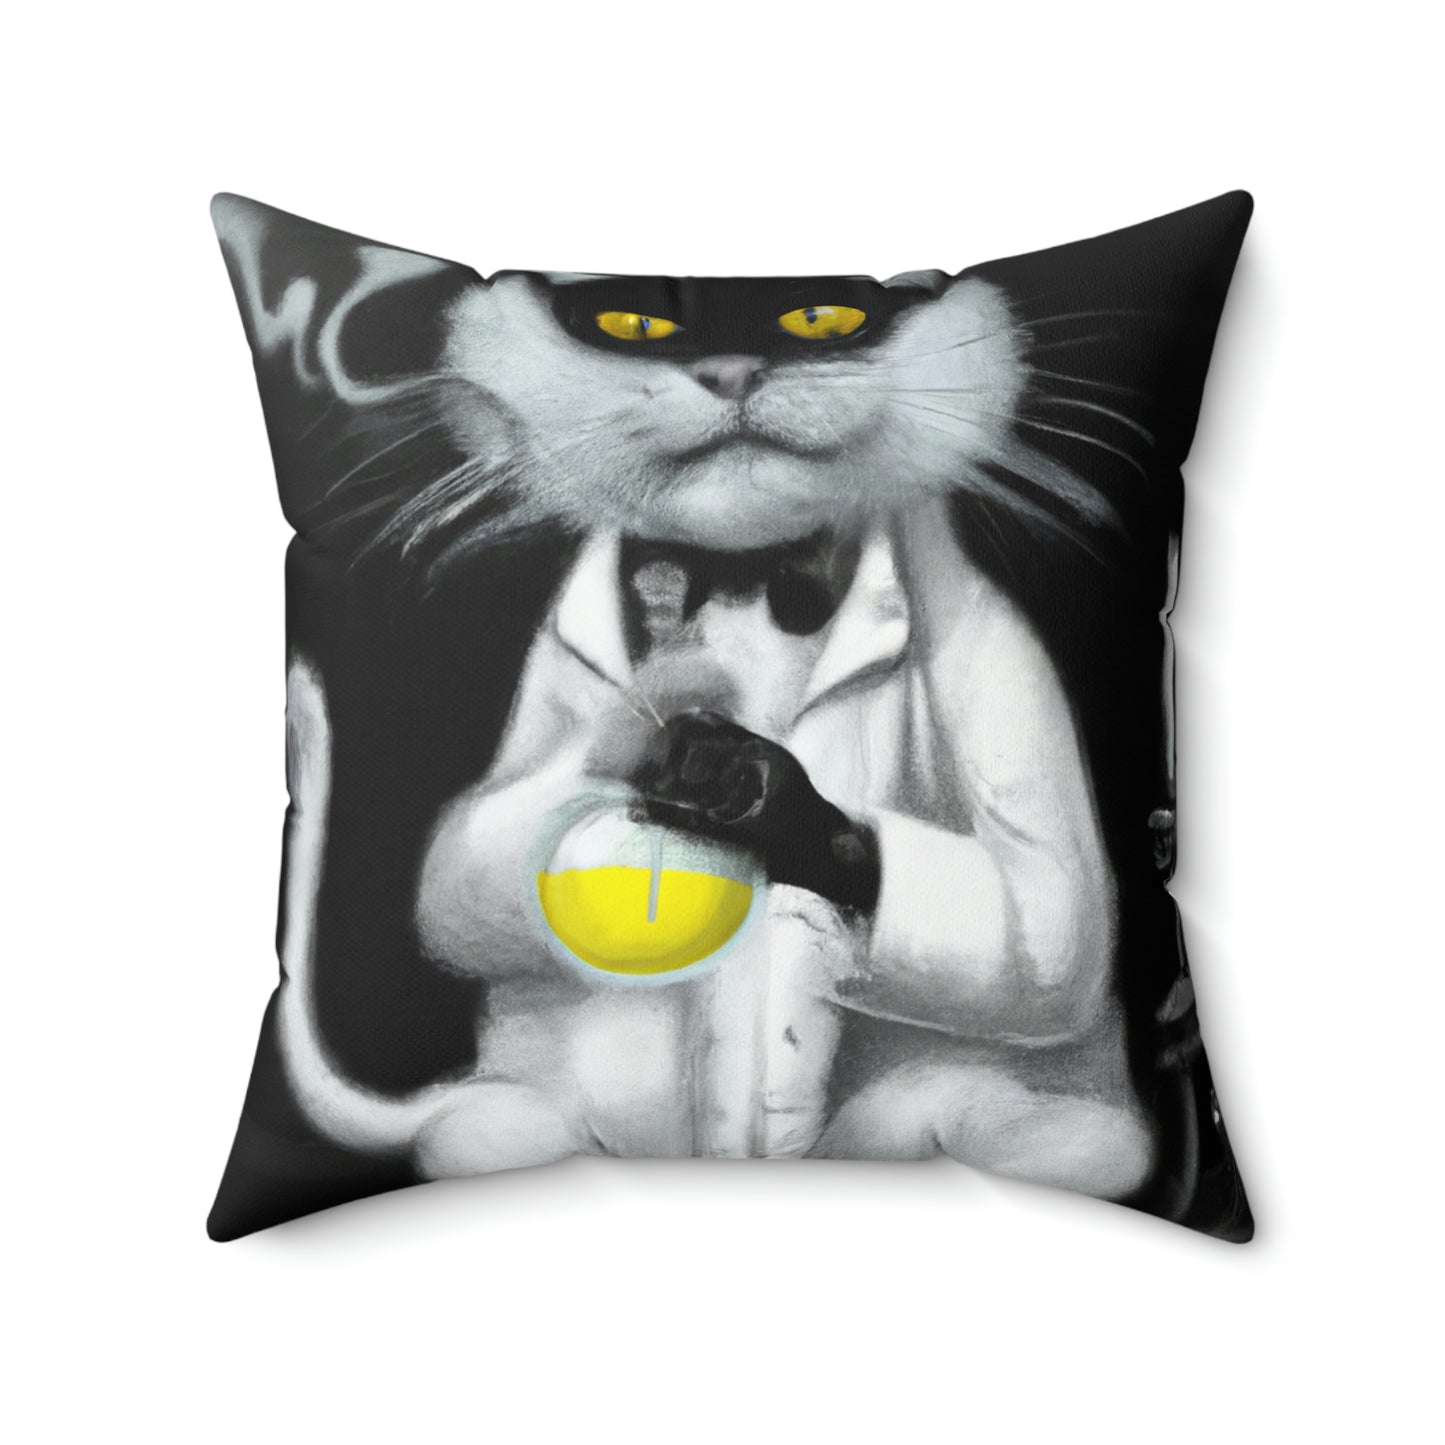 Mad Cat Decorative Polyester Square Pillow